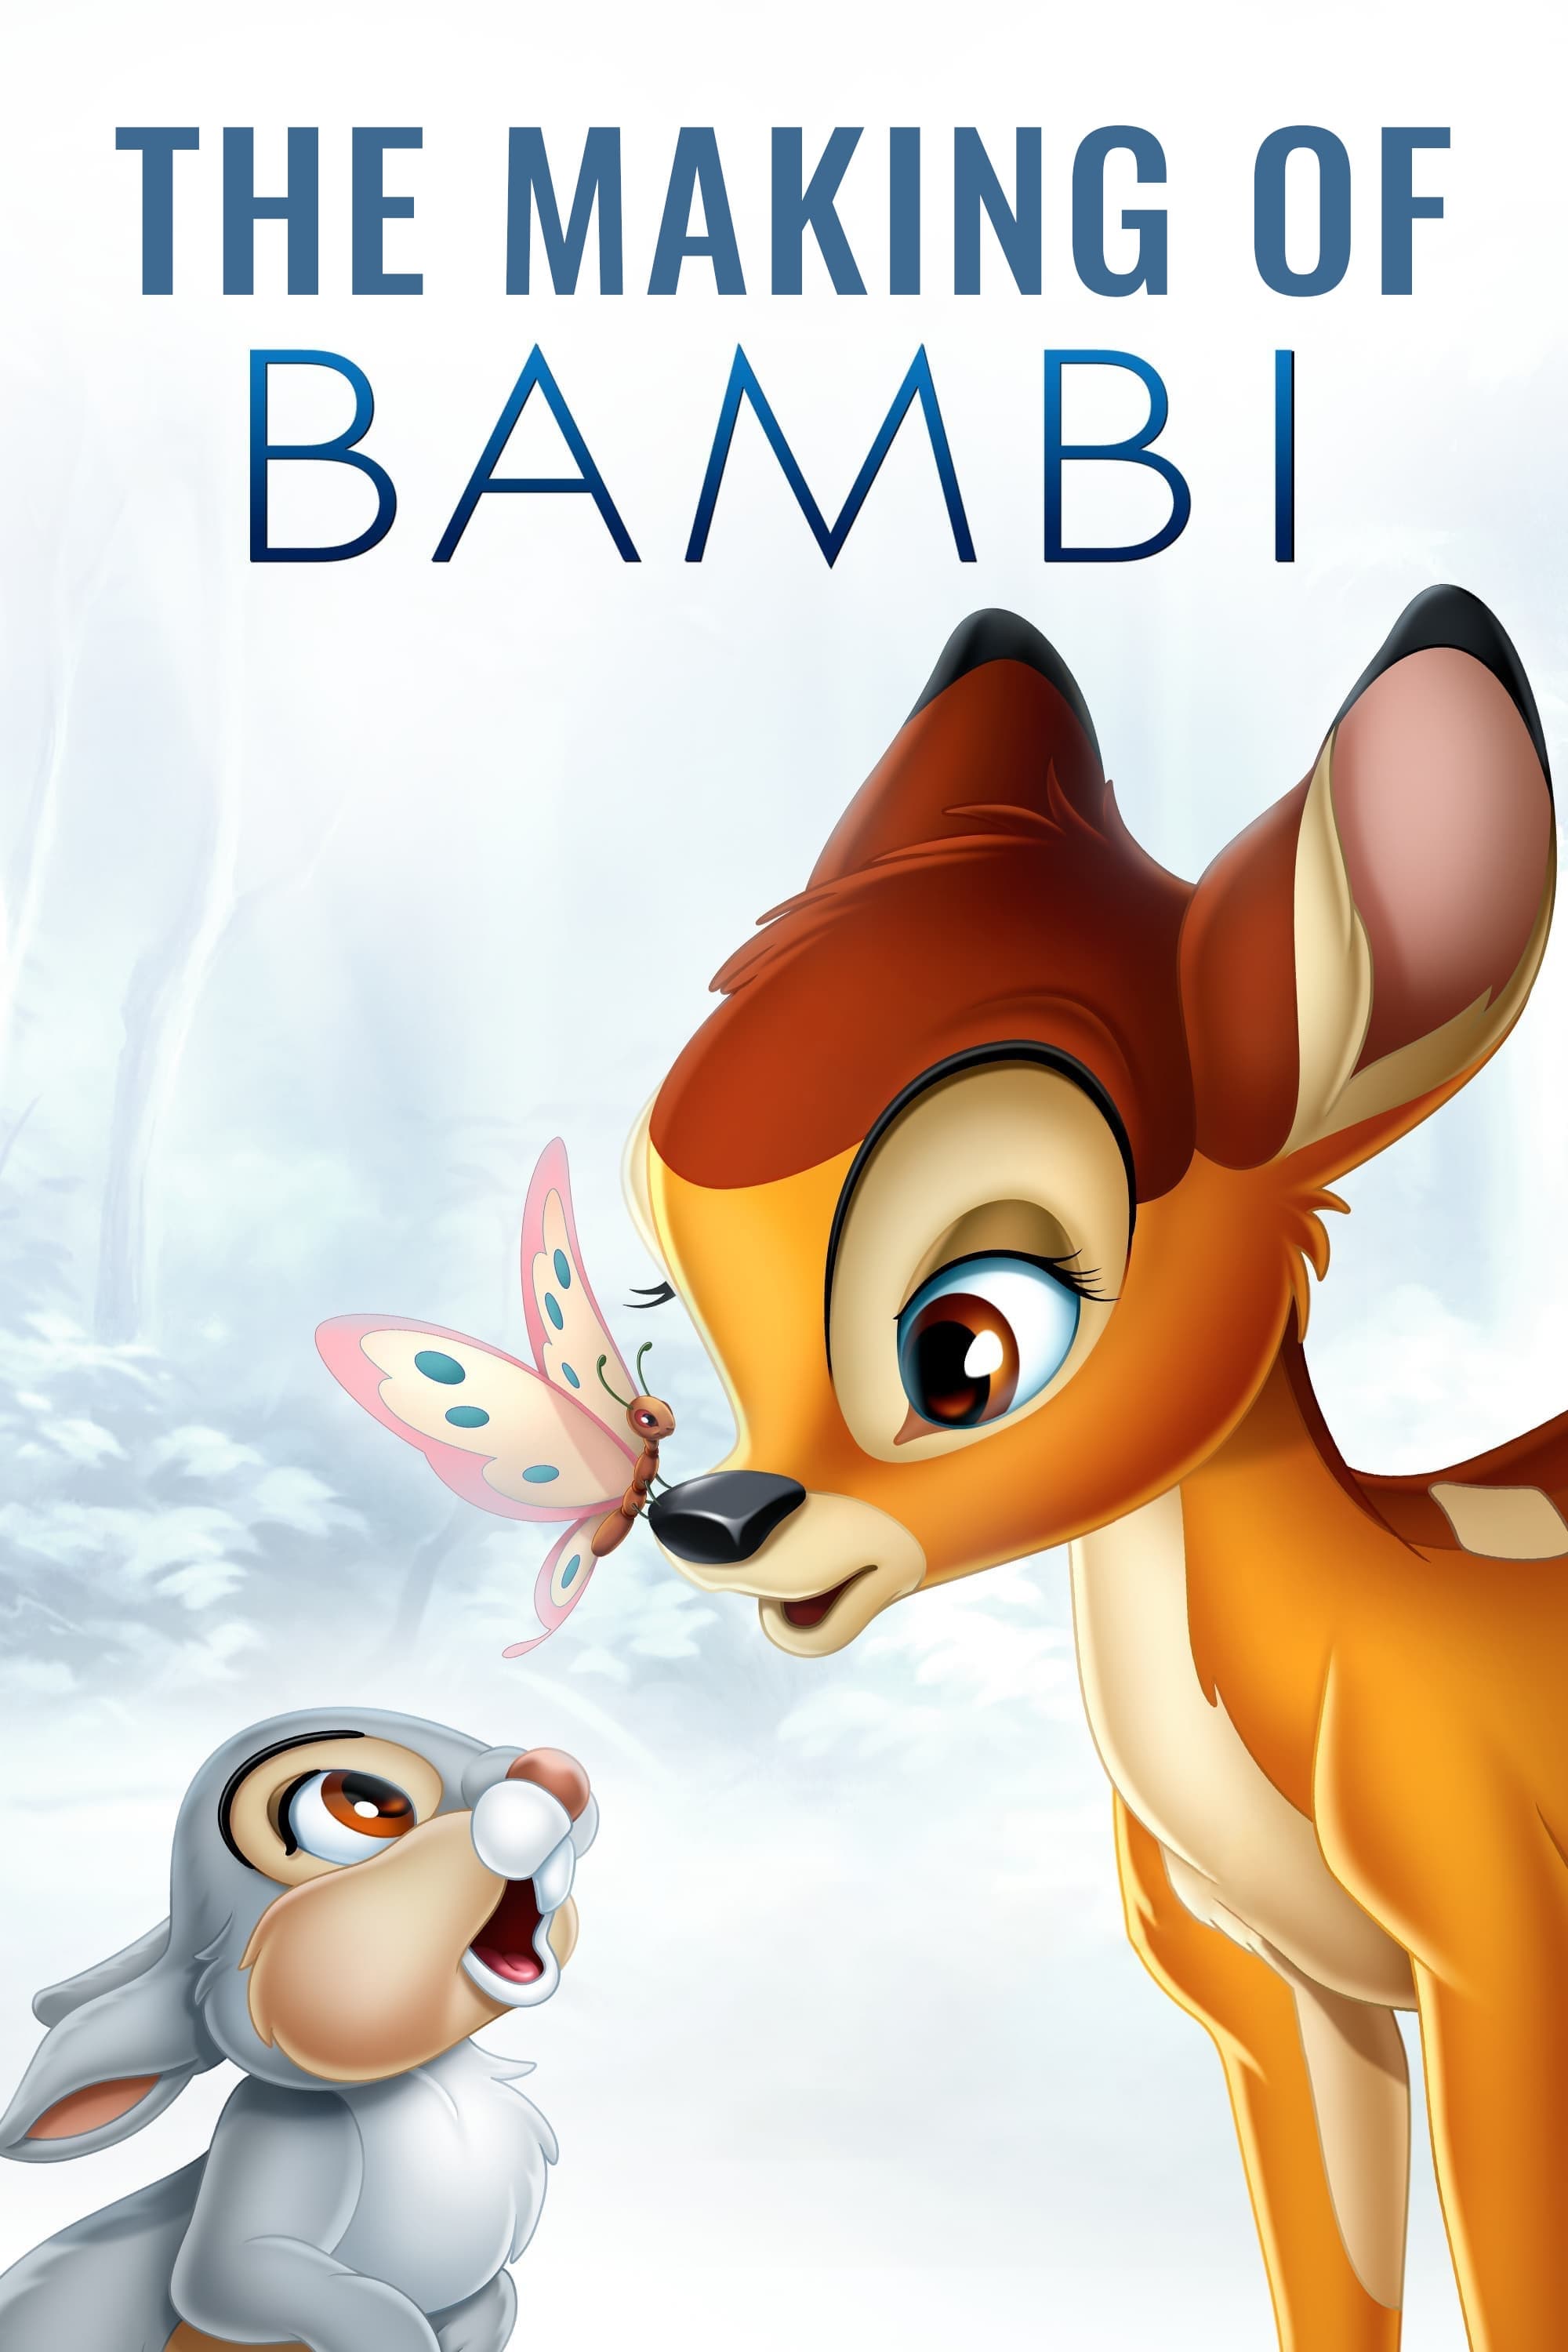 The Making of Bambi: A Prince is Born